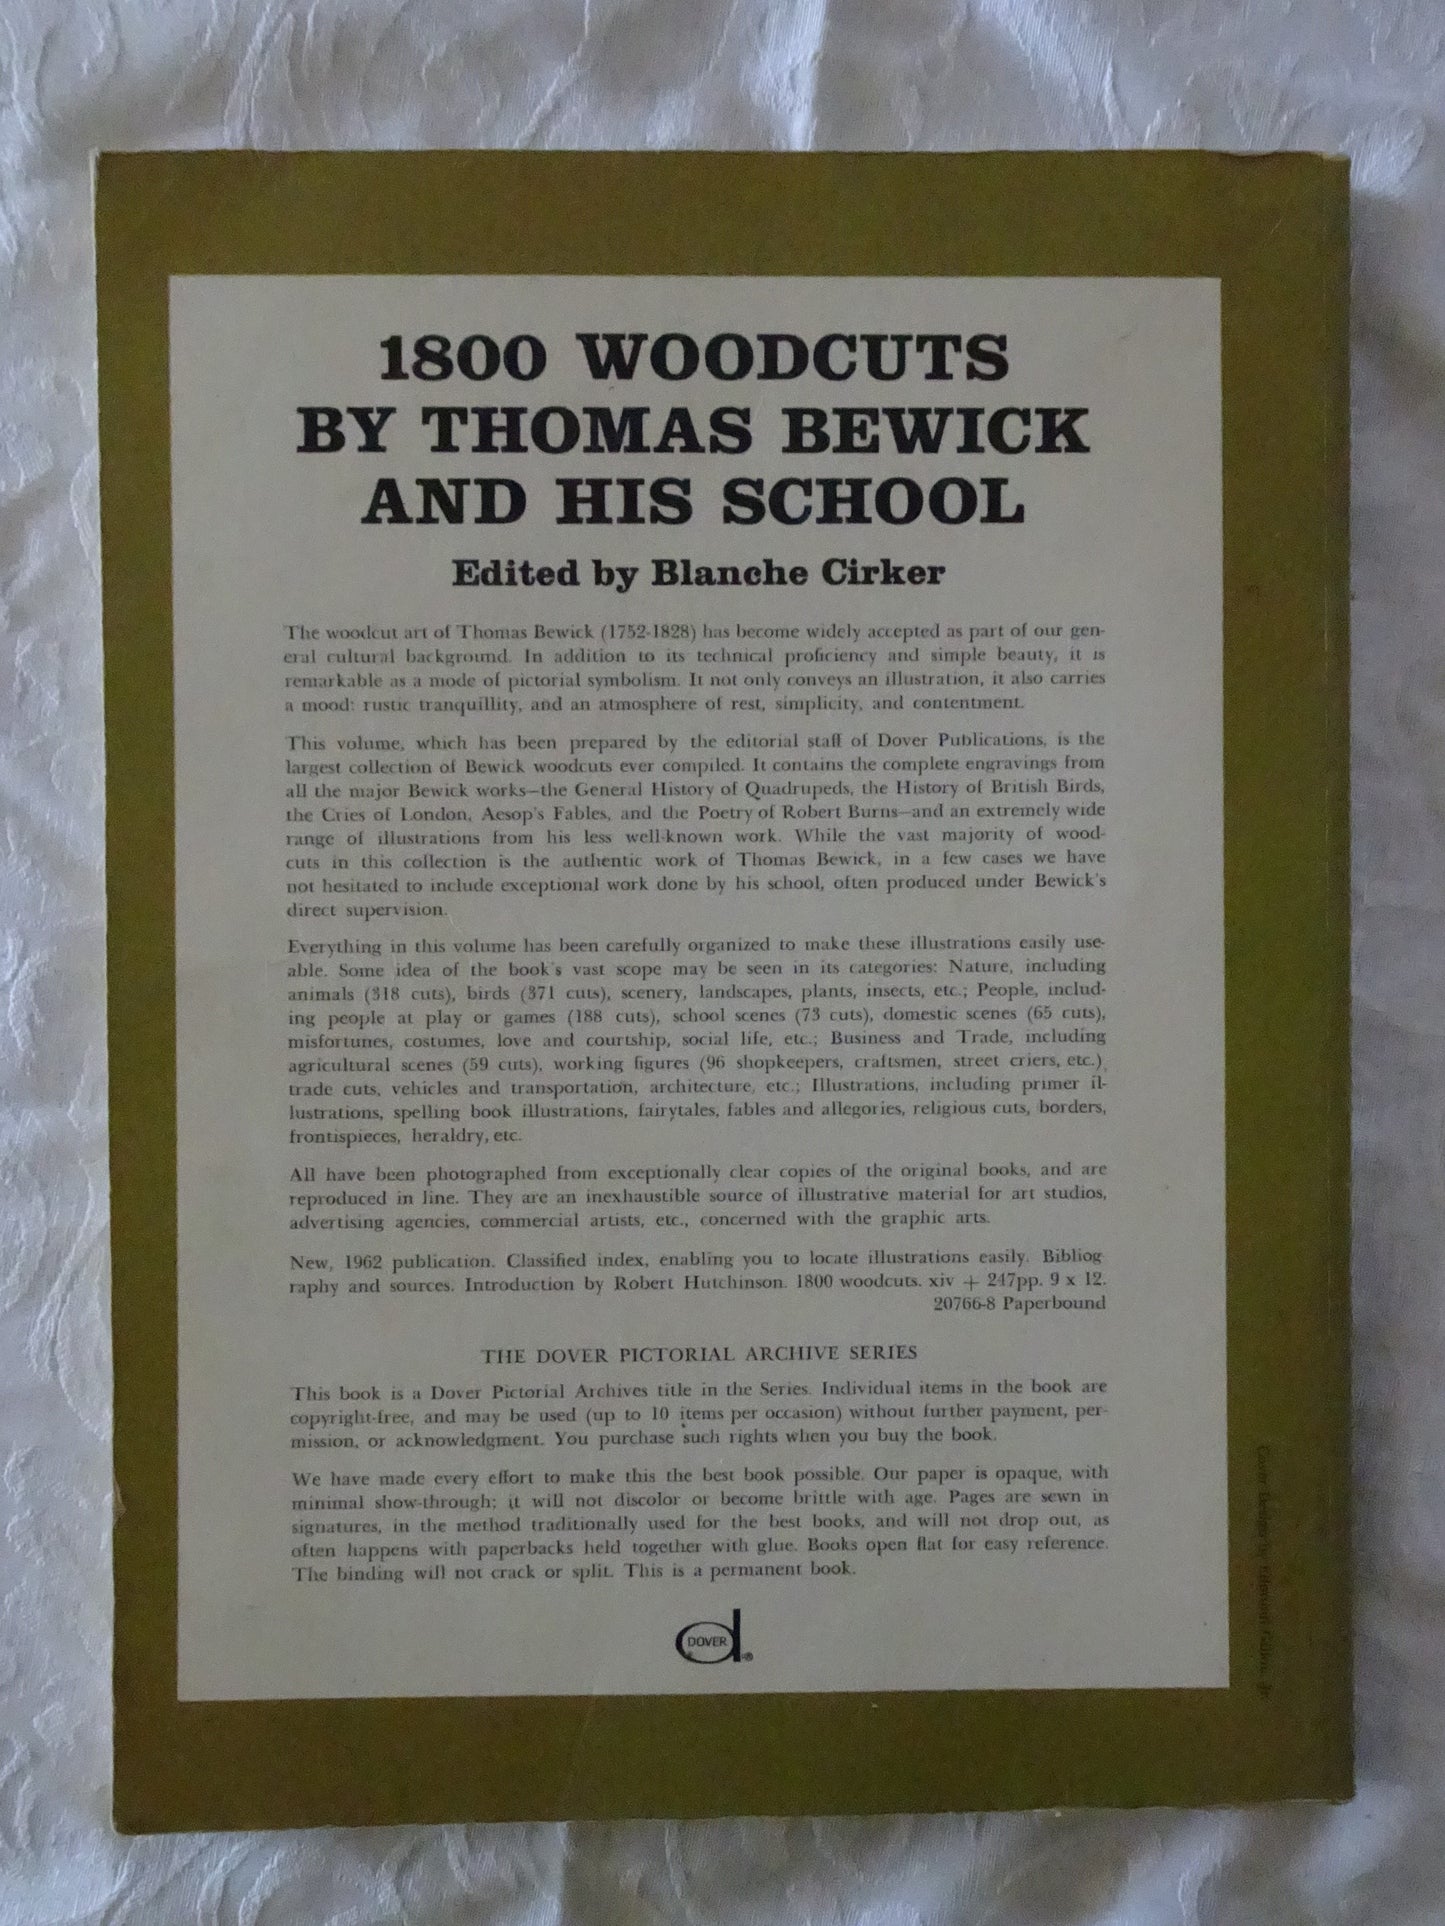 1800 Woodcuts By Thomas Bewick And His School by Blanche Cirker